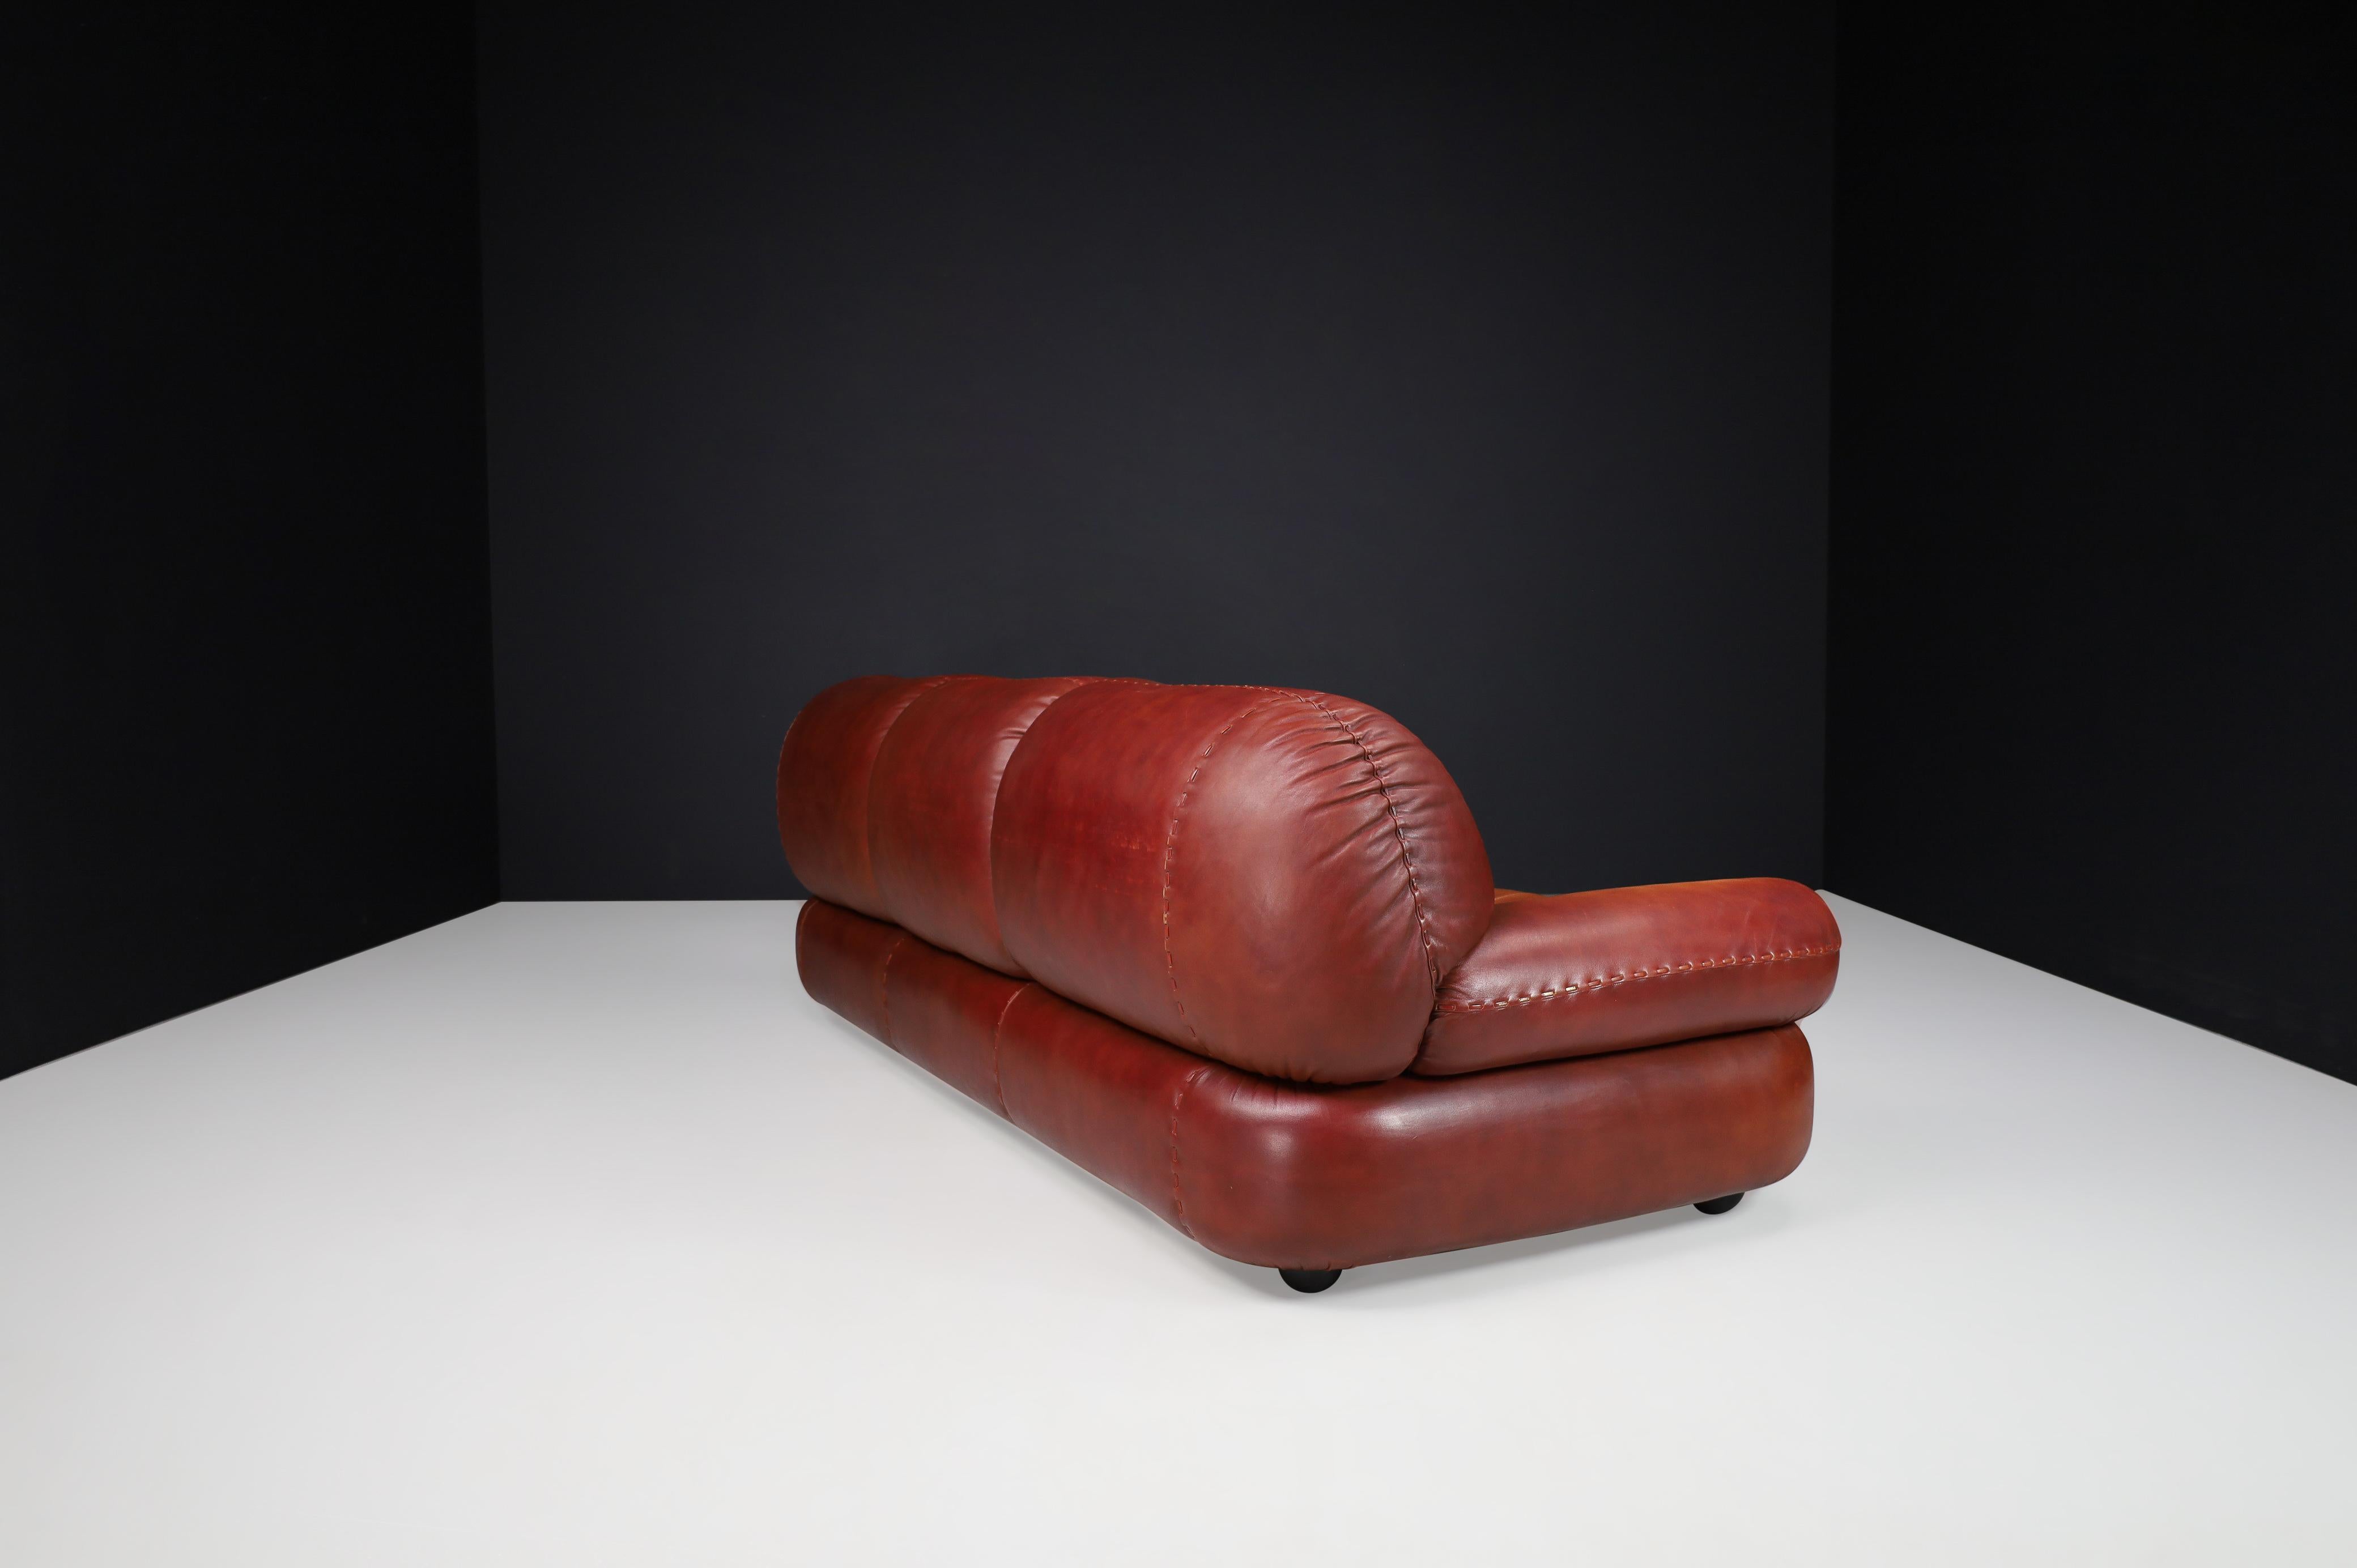 Italian Large Lounge Sofa in Firebrick Leather by Sapporo for Mobil Girgi, Italy, 1970 For Sale